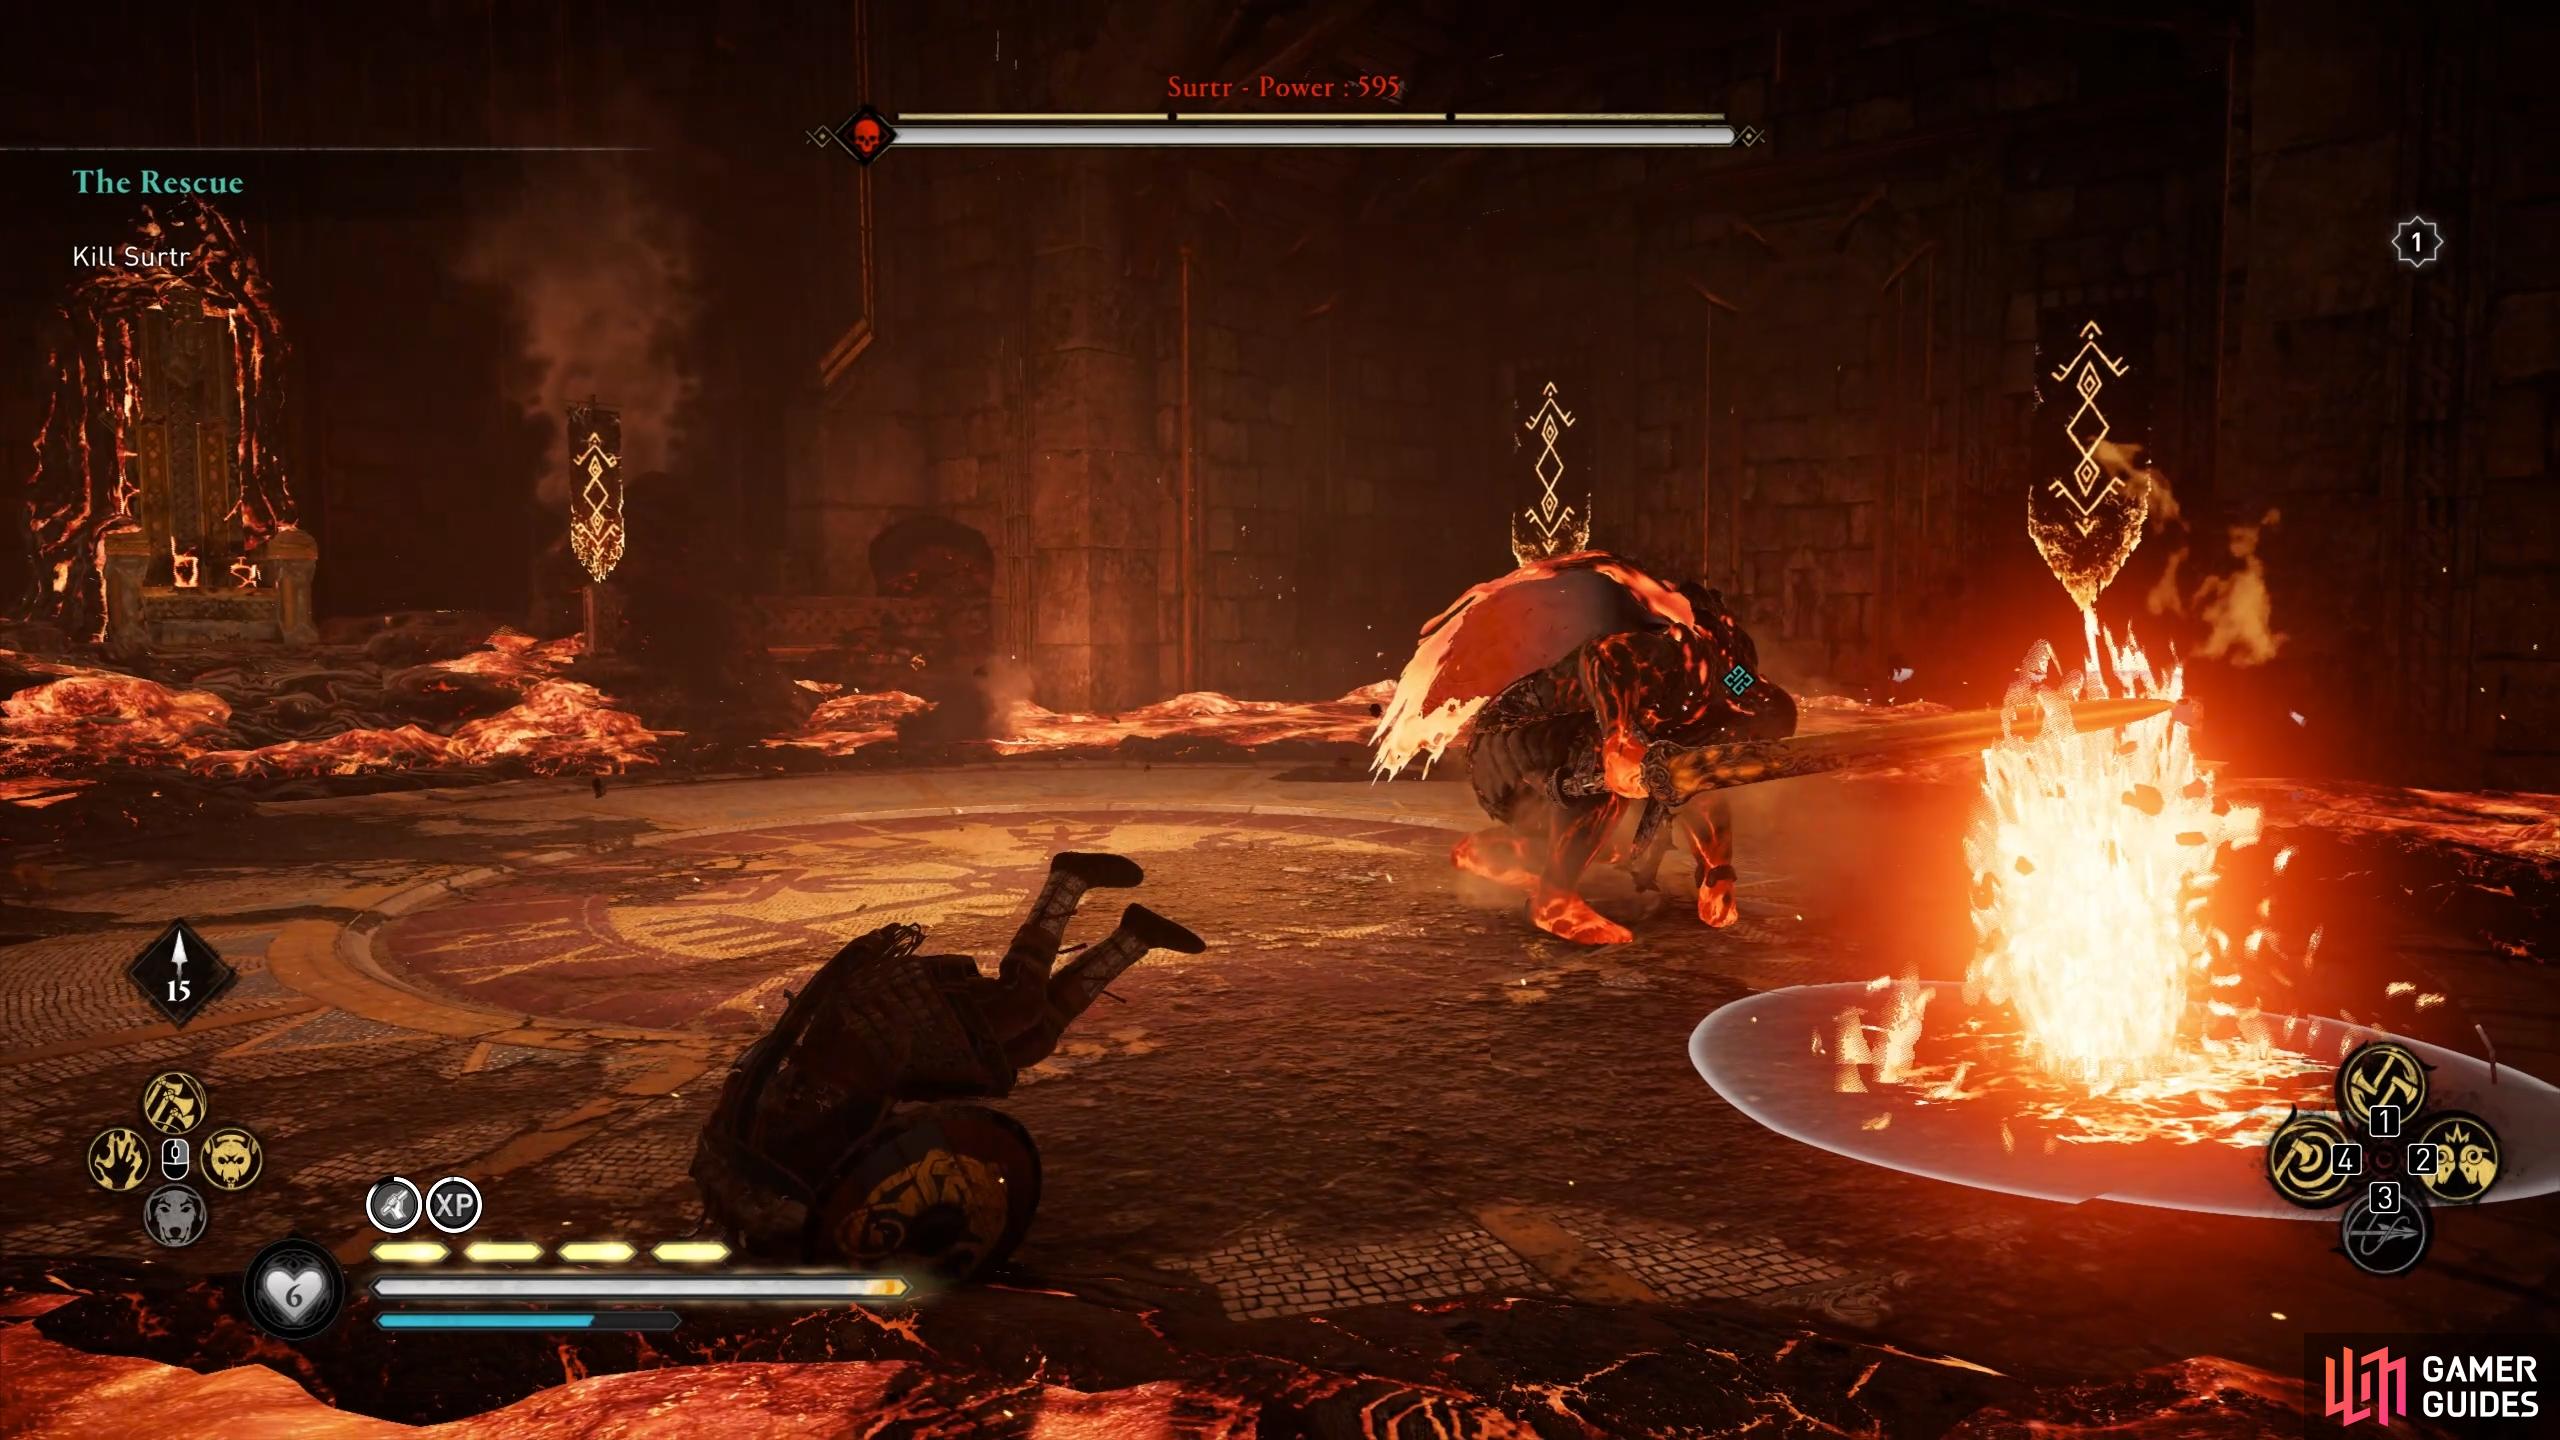 Be ready to dodge or roll away from the fissure when you see Surtr slam his fist into the ground.